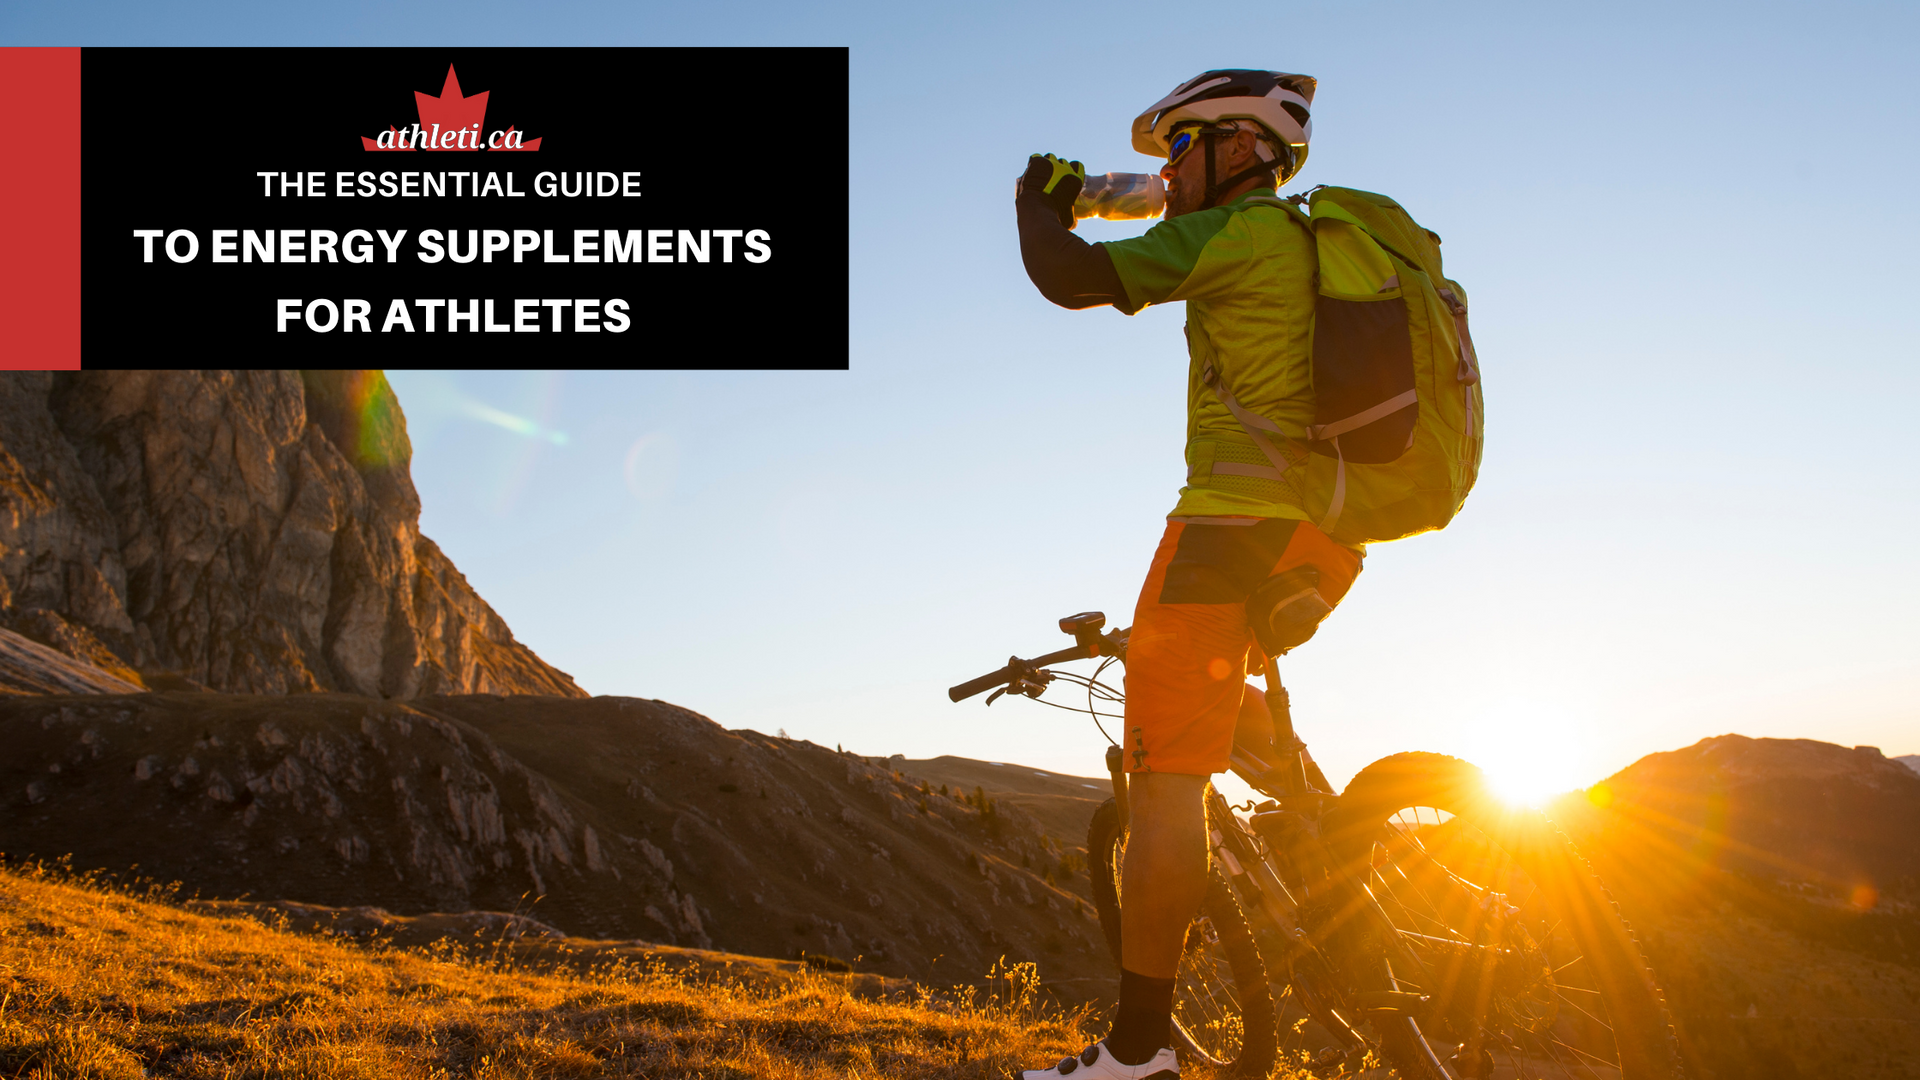 The Essential Guide to Energy Supplements for Athletes